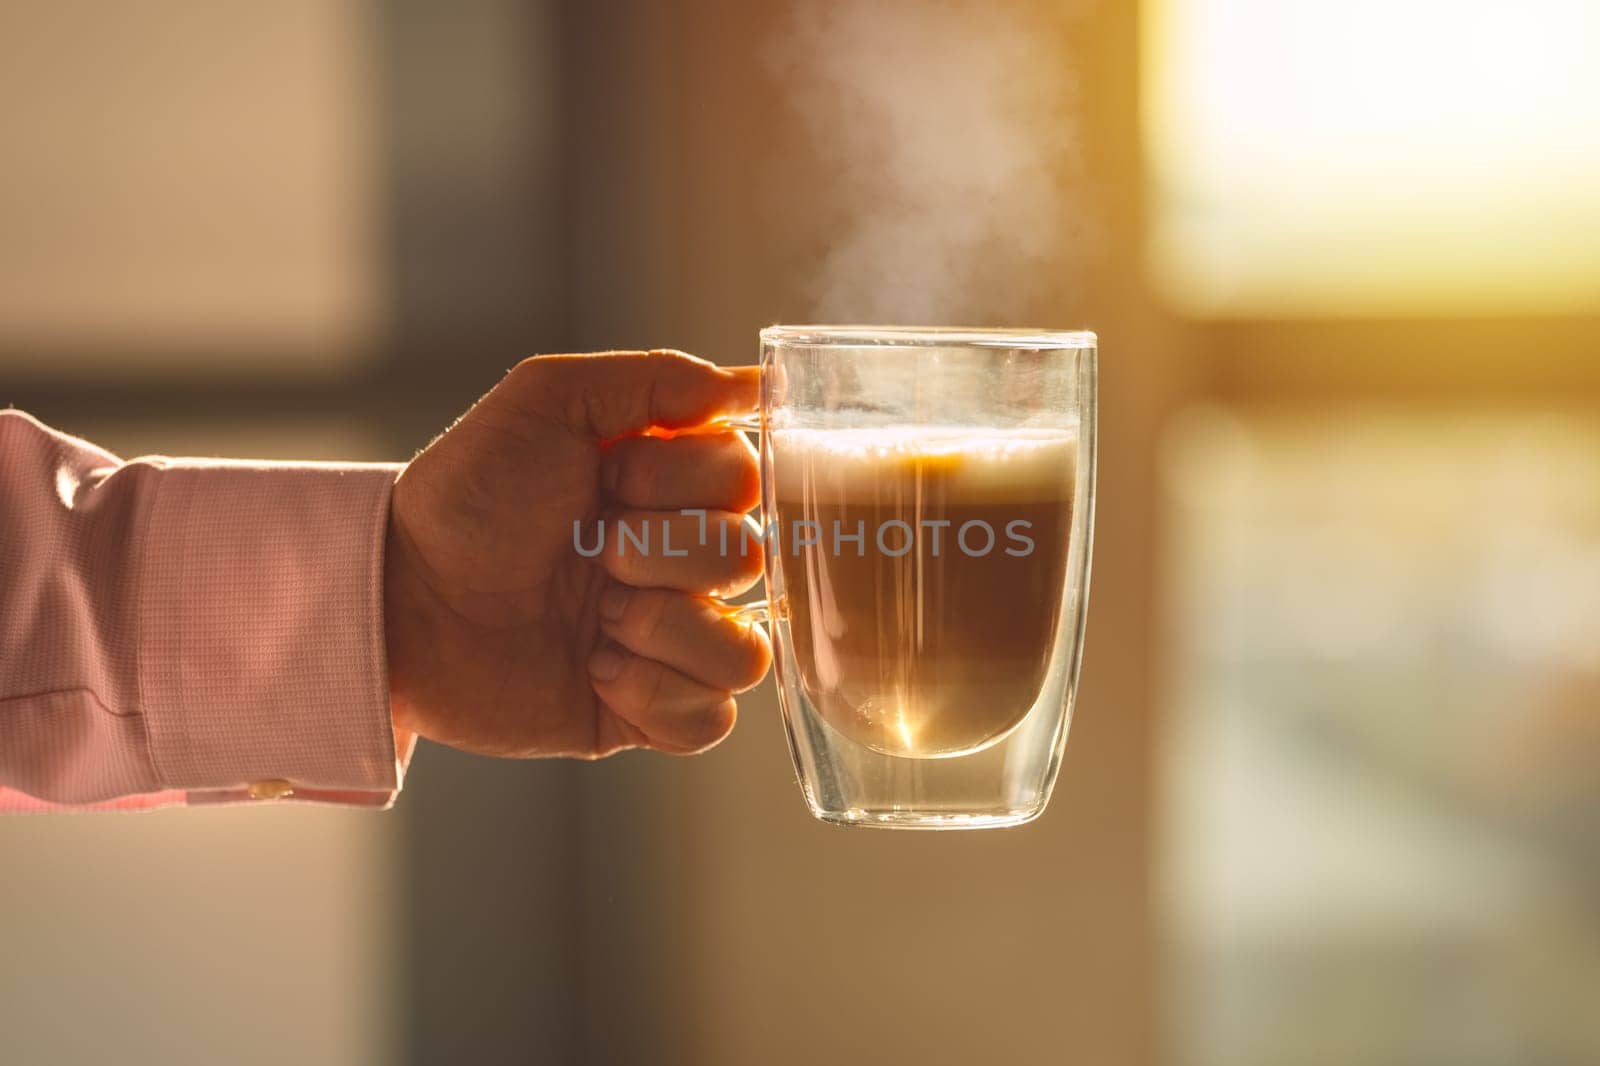 A cozy photo of a hand holding a steaming cup of coffee. The photo invokes warm feelings associated with sipping hot drinks before working day. High quality photo